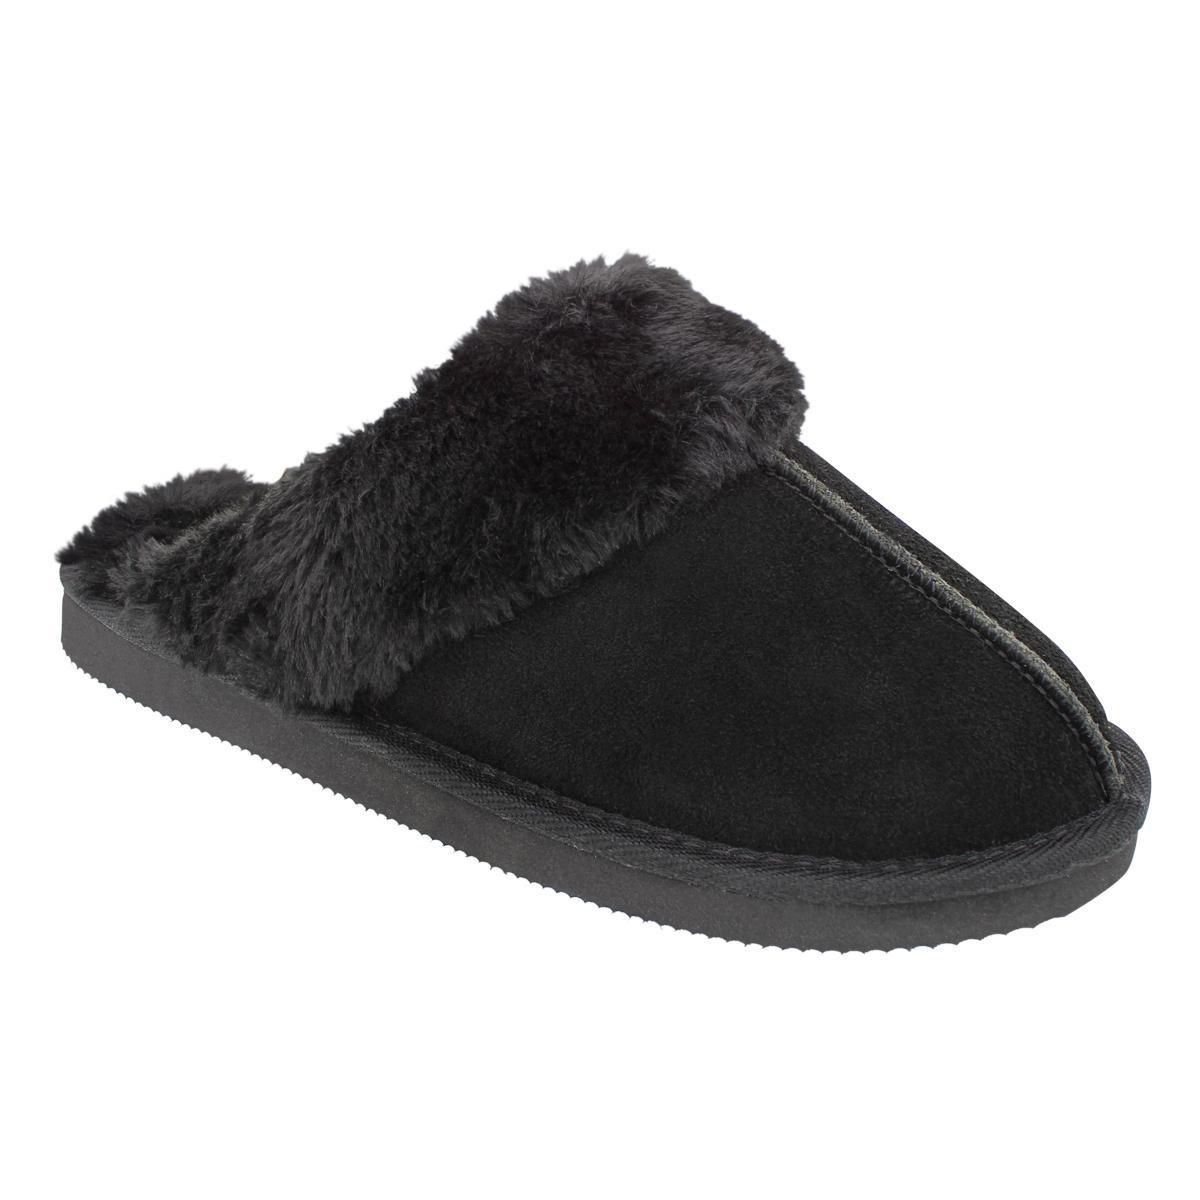 ISOspa by isotoner® Women's Lora Suede Clog Slippers | Walmart Canada